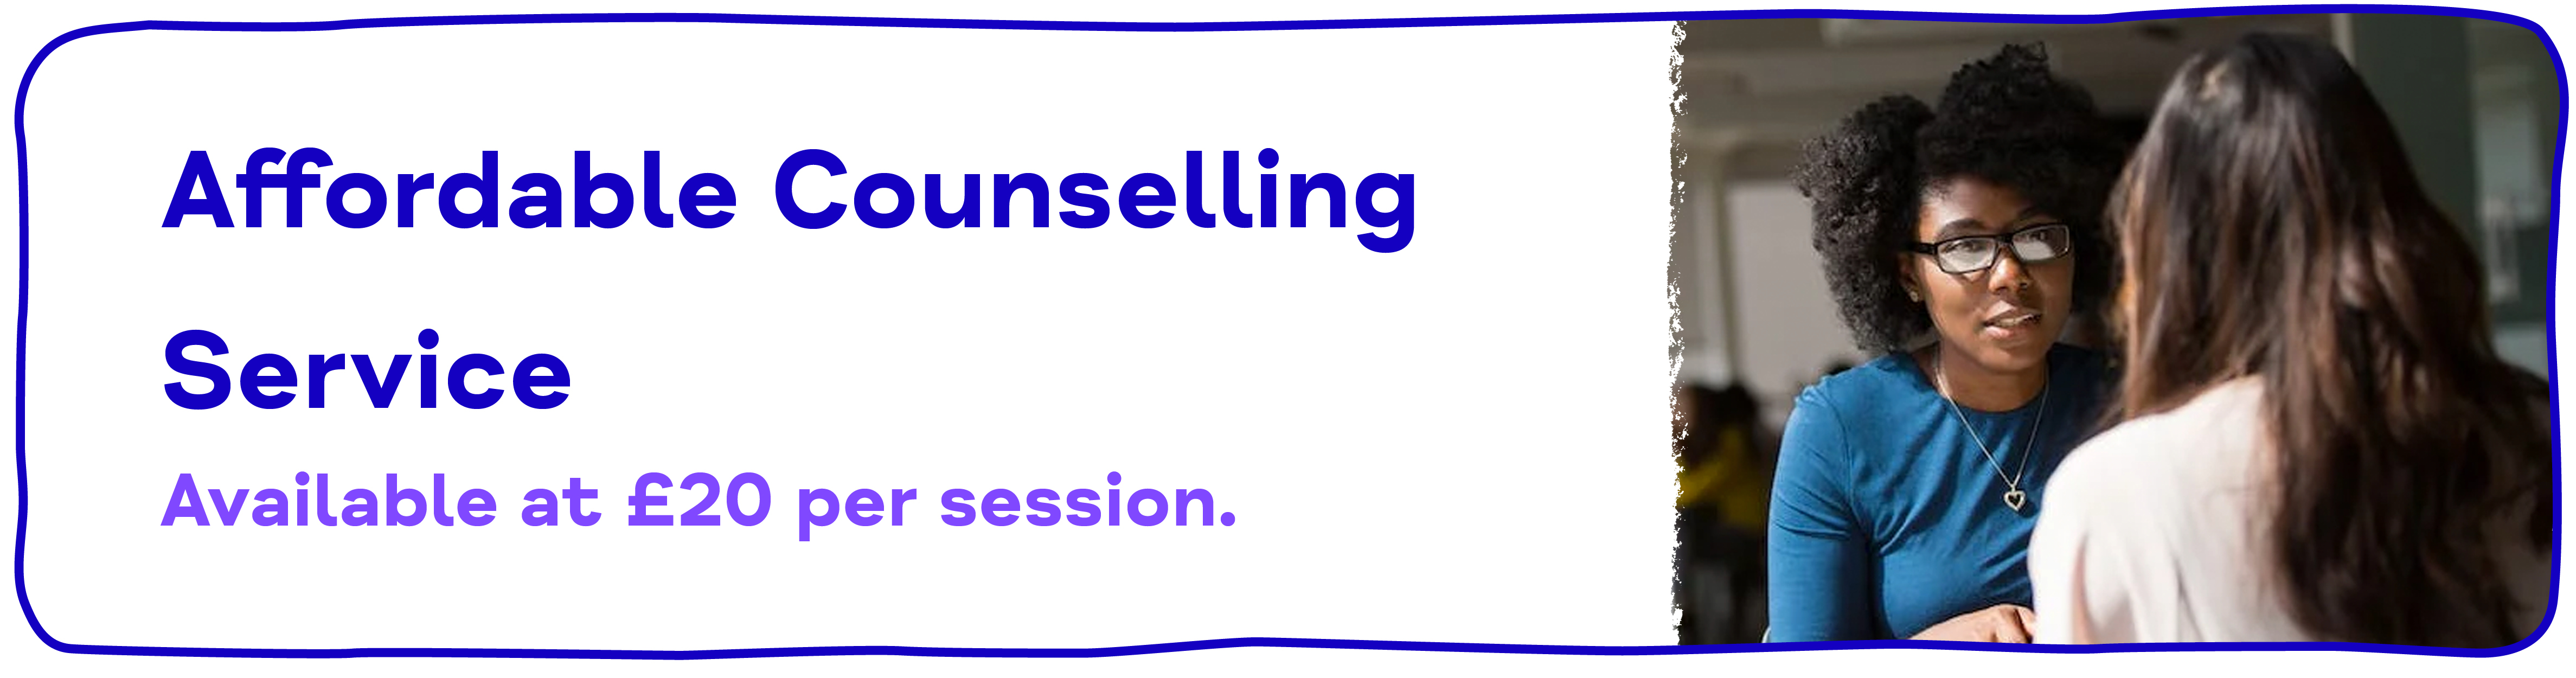 Affordable Counselling Service Available at £20 per session.